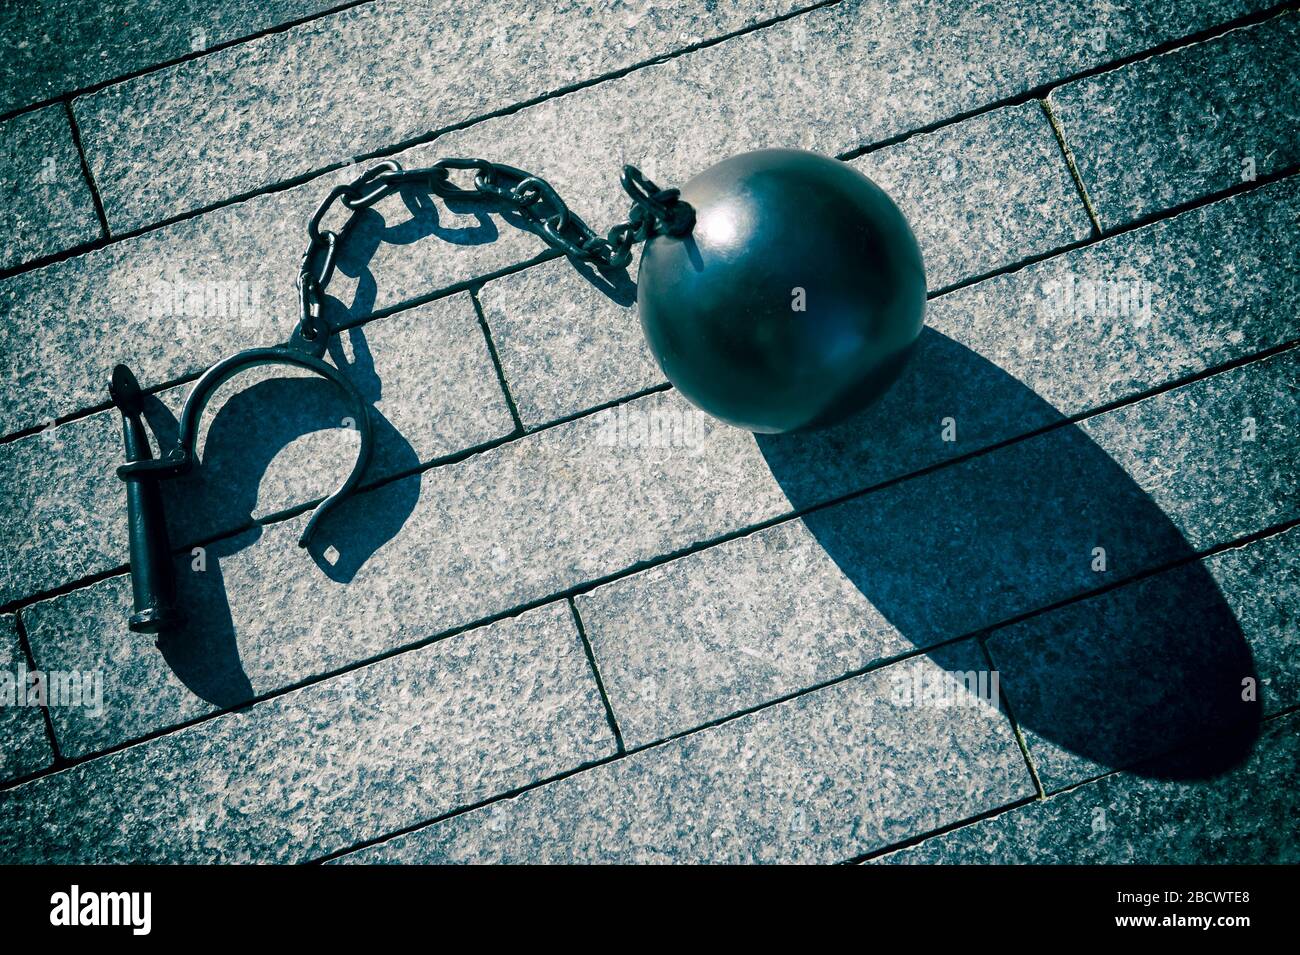 Big black iron ball with chain and shackle casting dramatic shadow outdoors on stone background Stock Photo